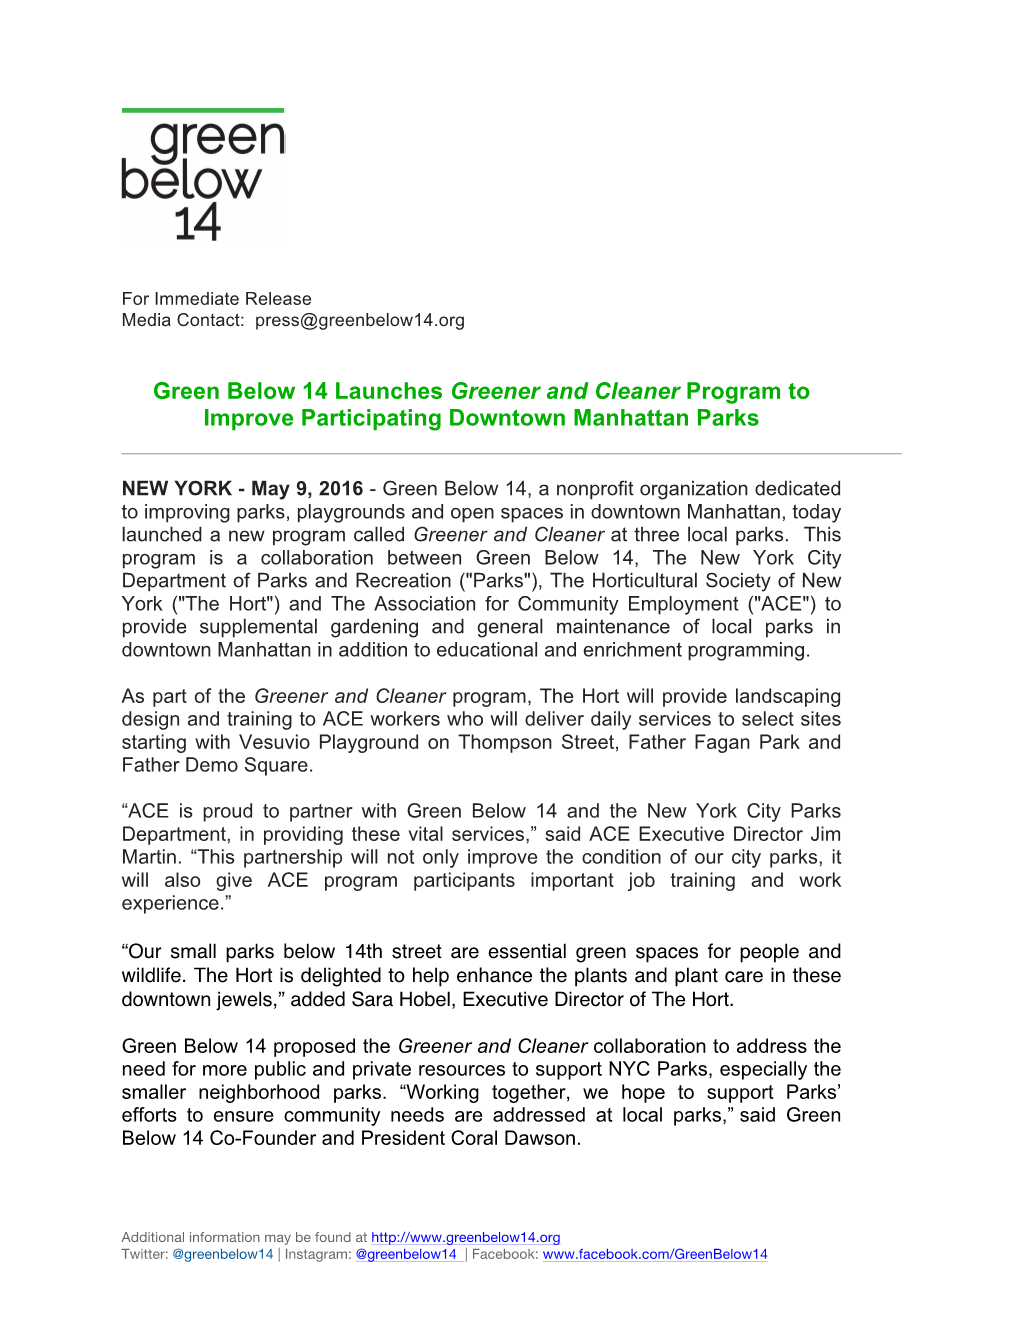 Green Below 14 Launches Greener and Cleaner Program to Improve Participating Downtown Manhattan Parks